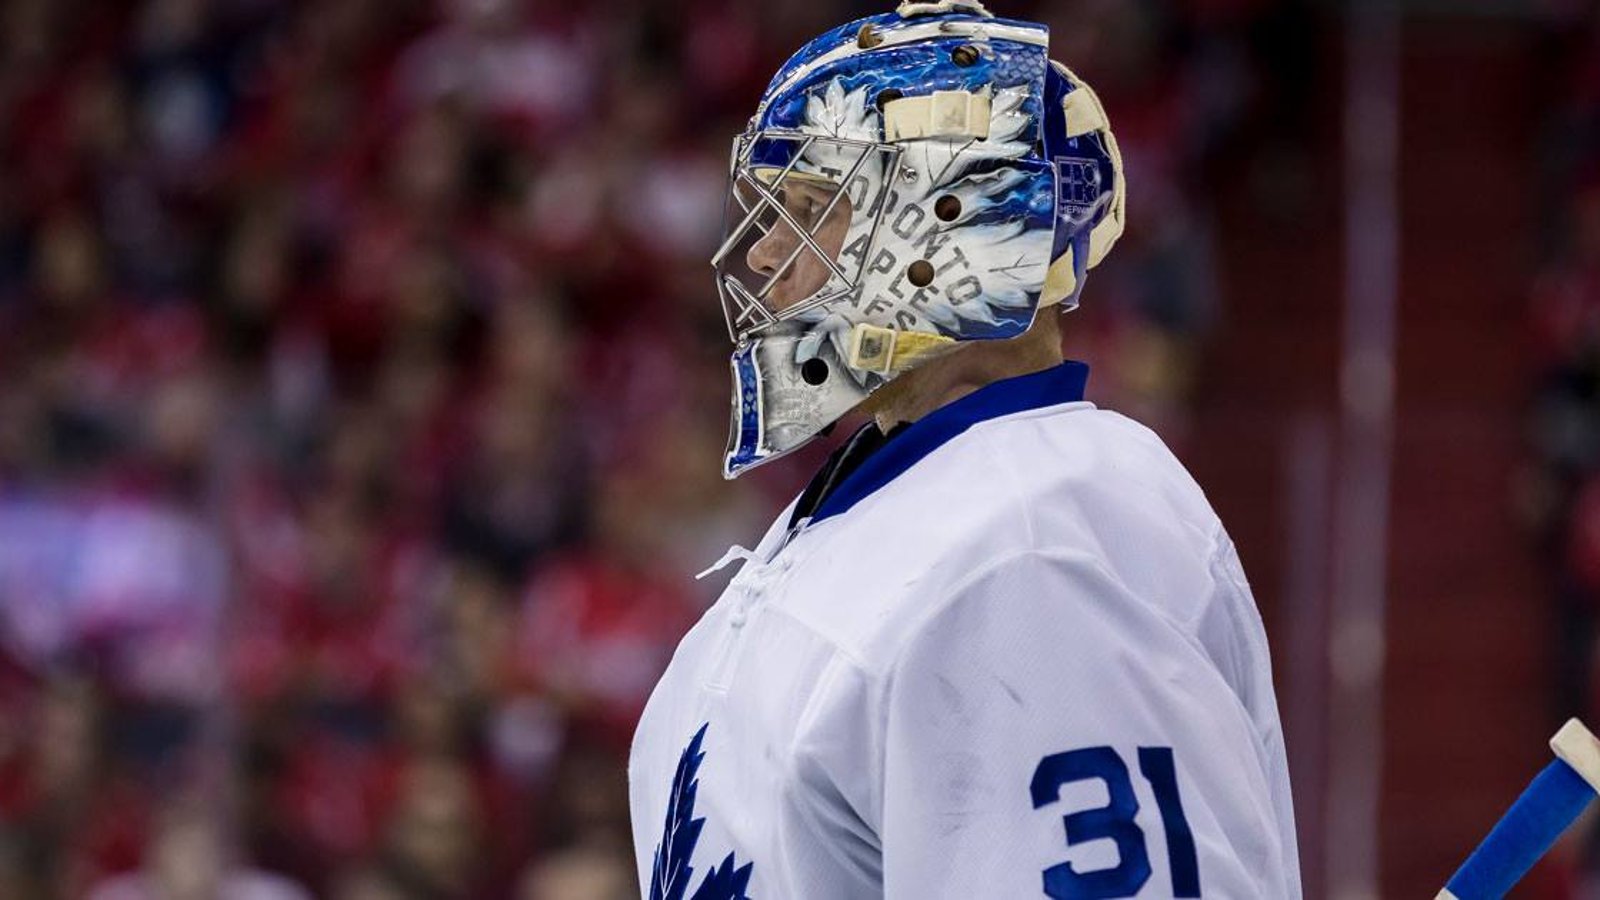 NHL insider makes unexpected prediction for Leafs' Frederik Andersen in 2017-18